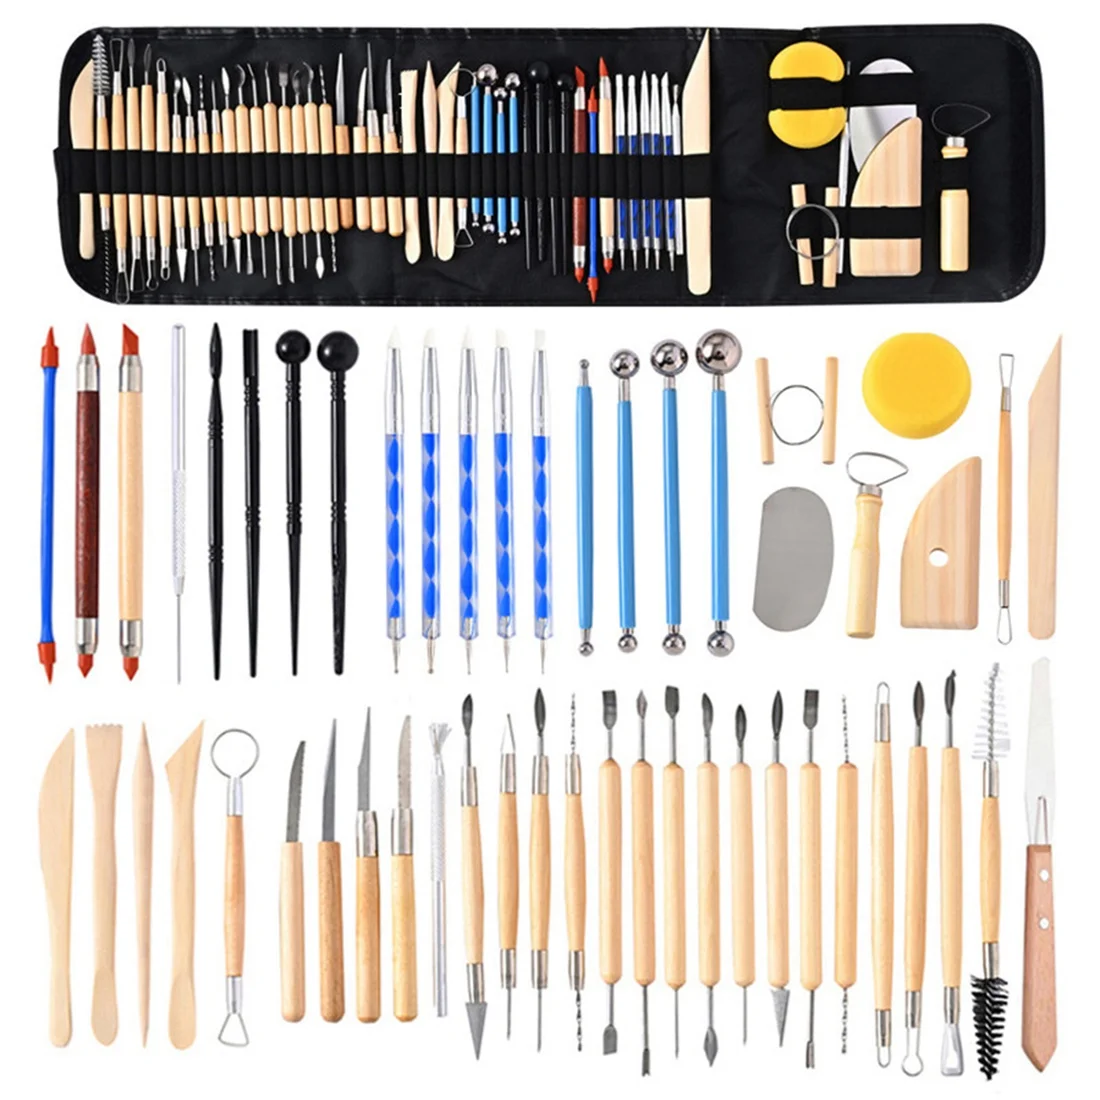 

Pottery and Clay Sculpting Tools Set Ceramic Clay Sculpting Tools with Carrying Case for Beginners Experts Kids